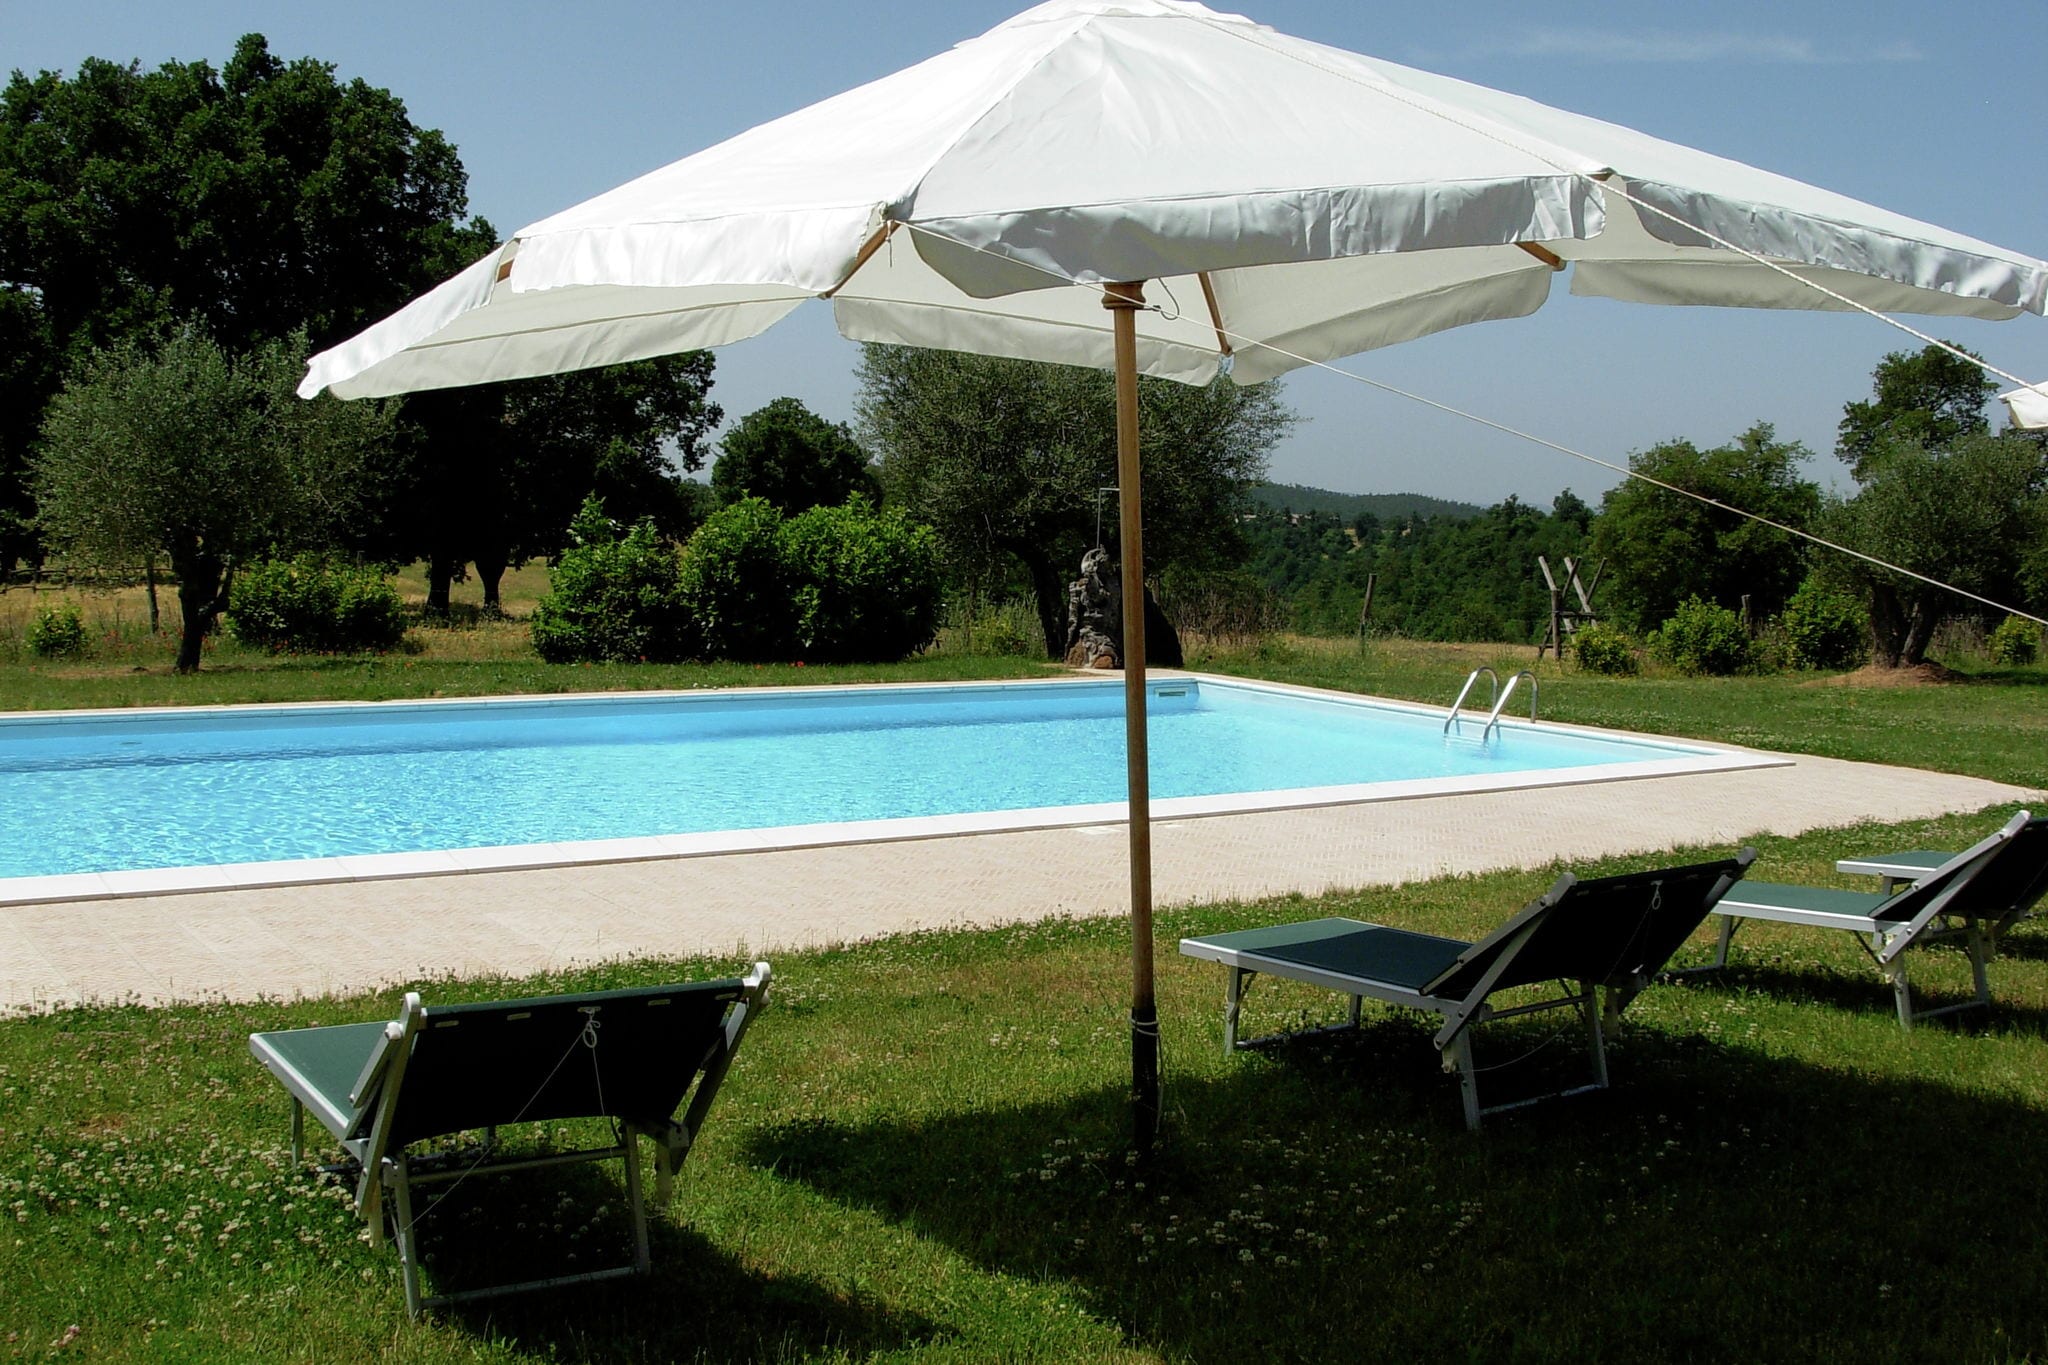 Apartment in an organic agriturismo with sheep, pool, quiet location